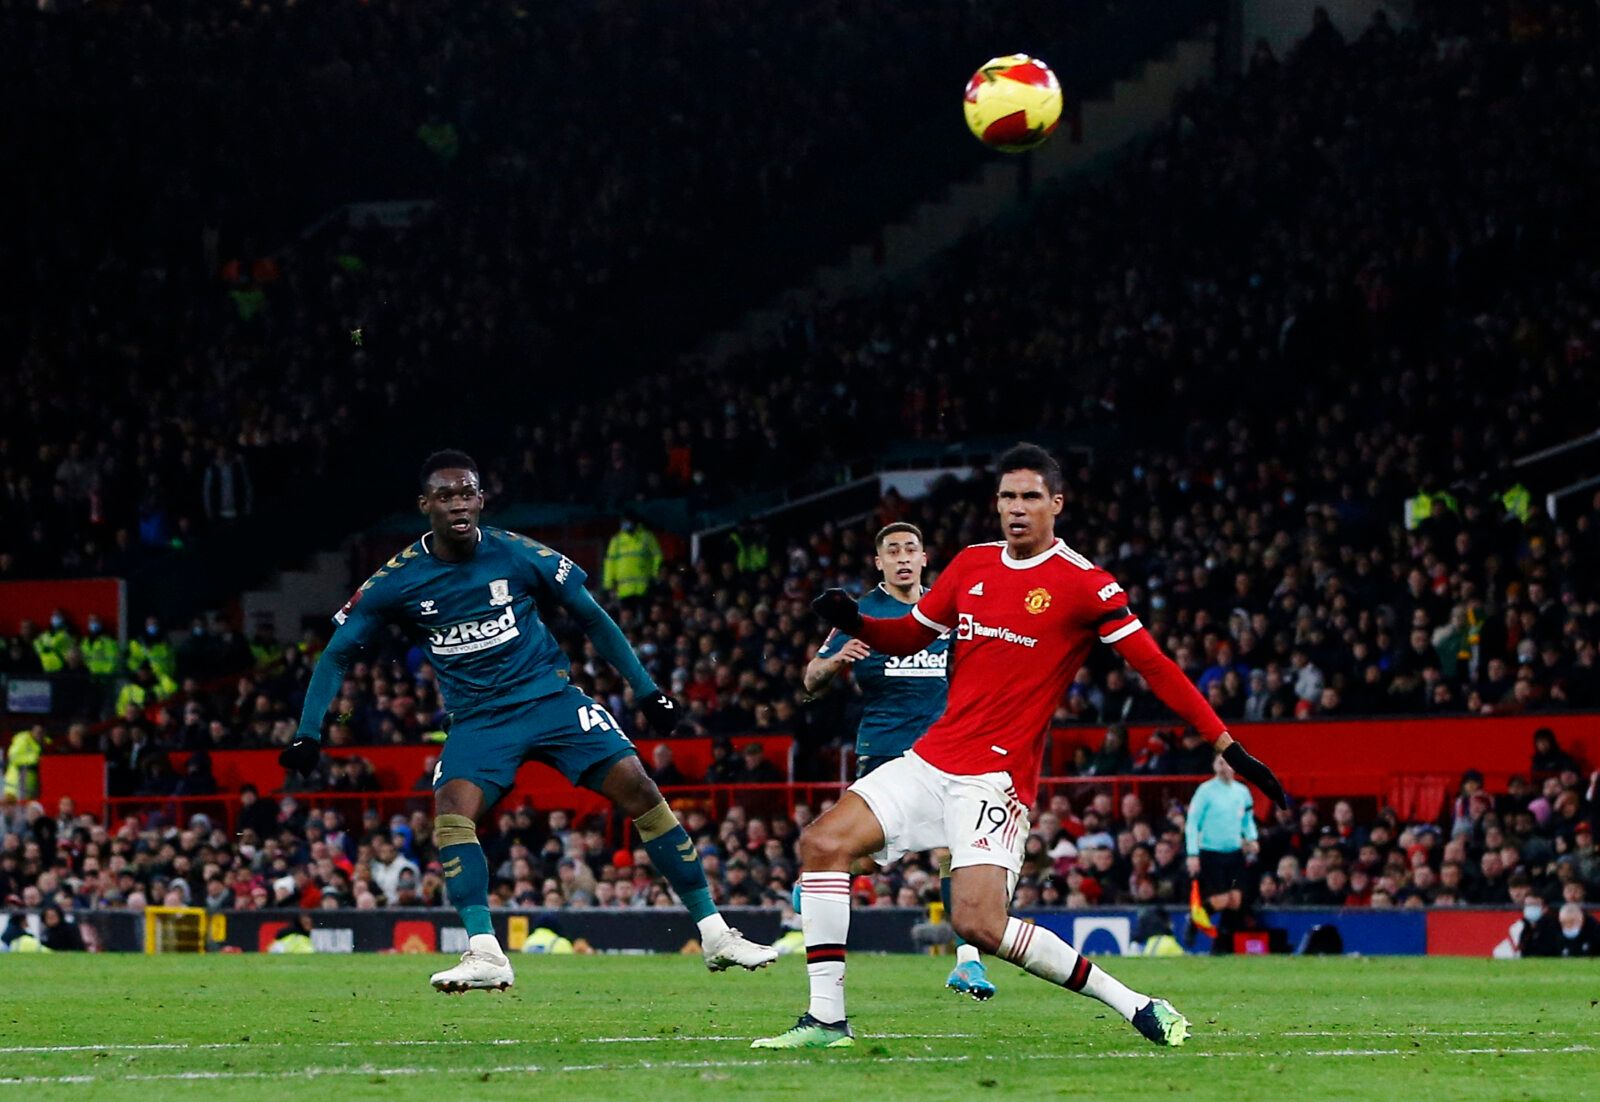 Soccer Football - FA Cup Fourth Round - Manchester United v Middlesbrough - Old Trafford, Manchester, Britain - February 4, 2022 Middlesbrough's Folarin Balogun shoots at goal REUTERS/Craig Brough